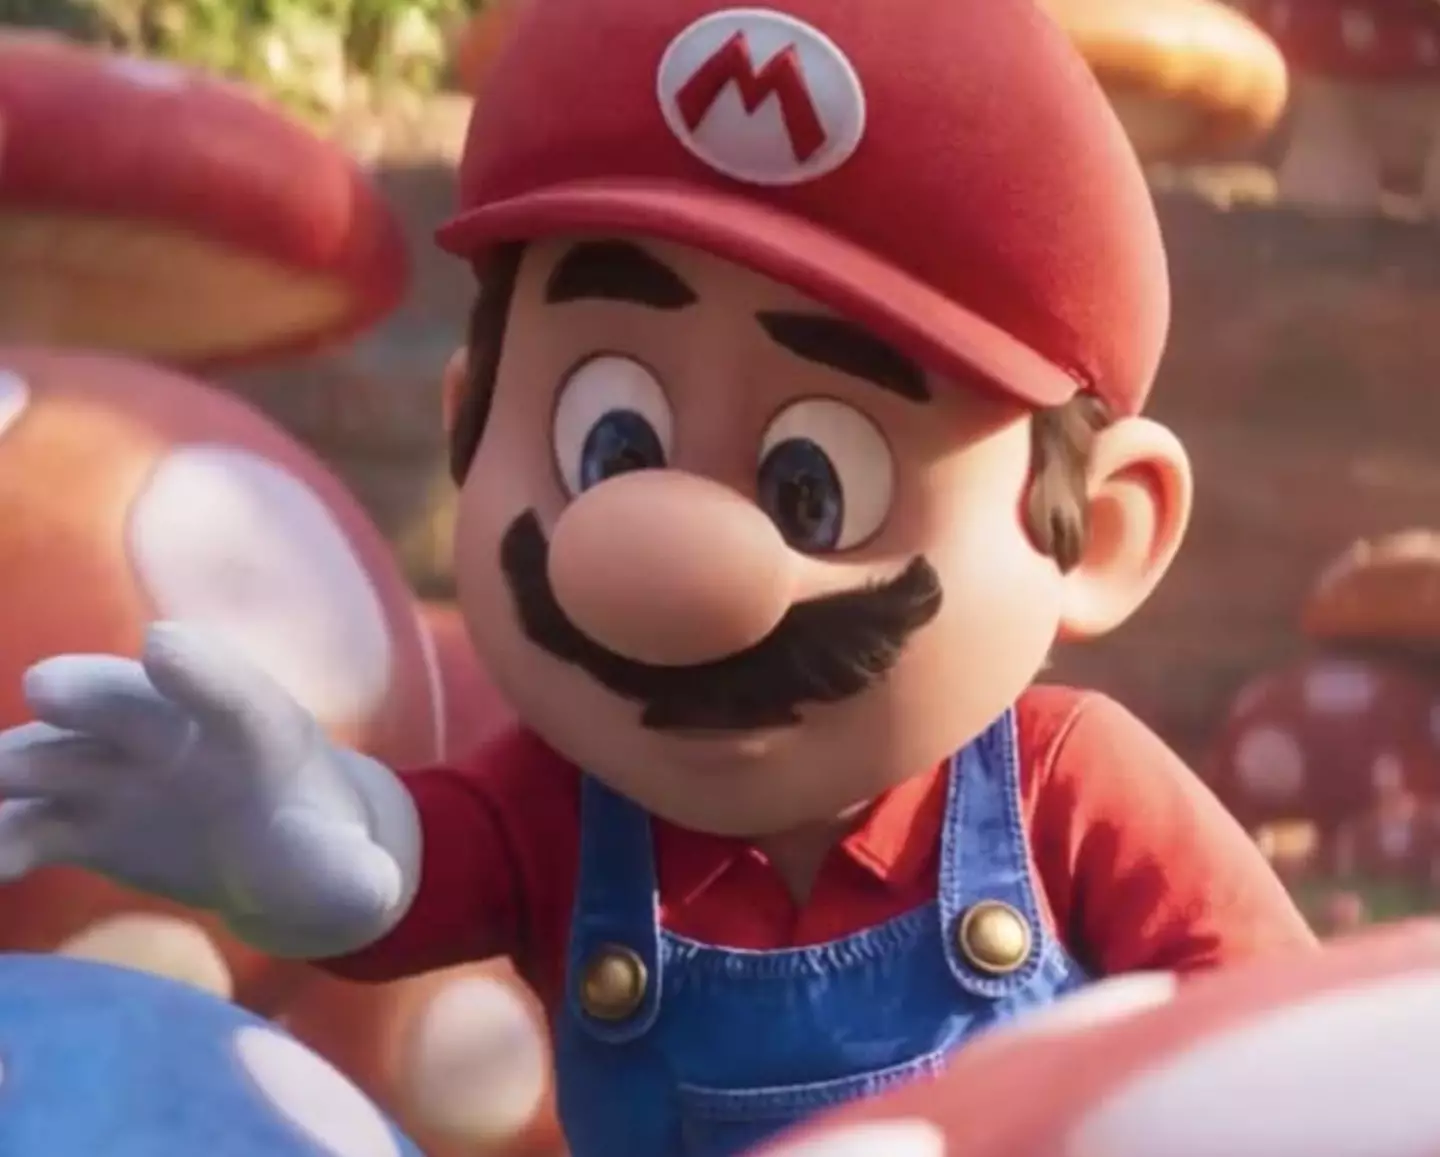 Fans have also expressed their dismay with Chris Pratt's accent for Mario.